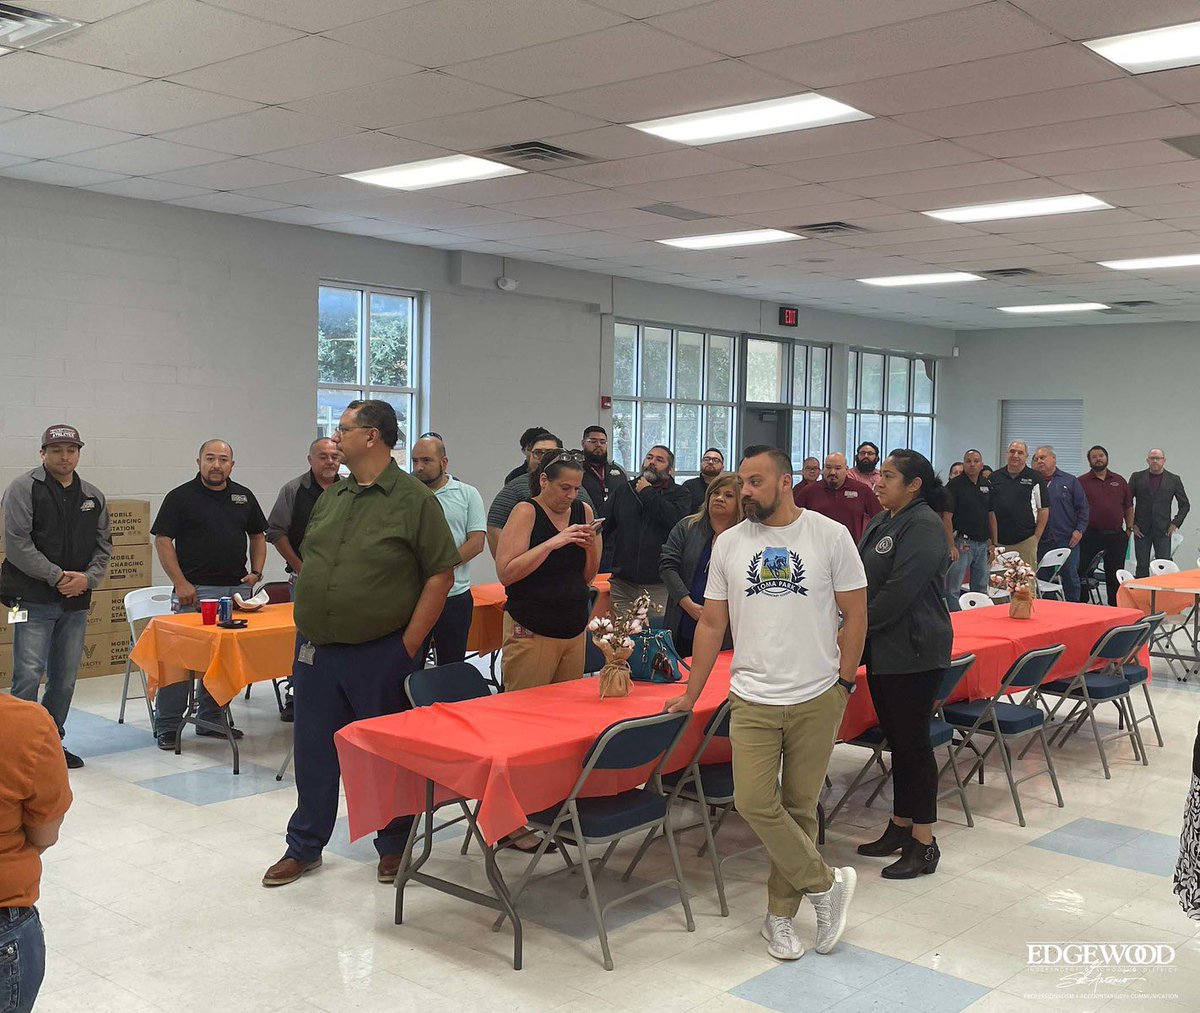 At our Superintendent Thanksgiving Luncheon we express our gratitude for the blessings in life! Although it may be challenging we reminded our teams that faith & prayer changes things! Romans 8:31 “If God is for us, Who can be against us” #AttitudeofGratitude #OurPeopleMatter